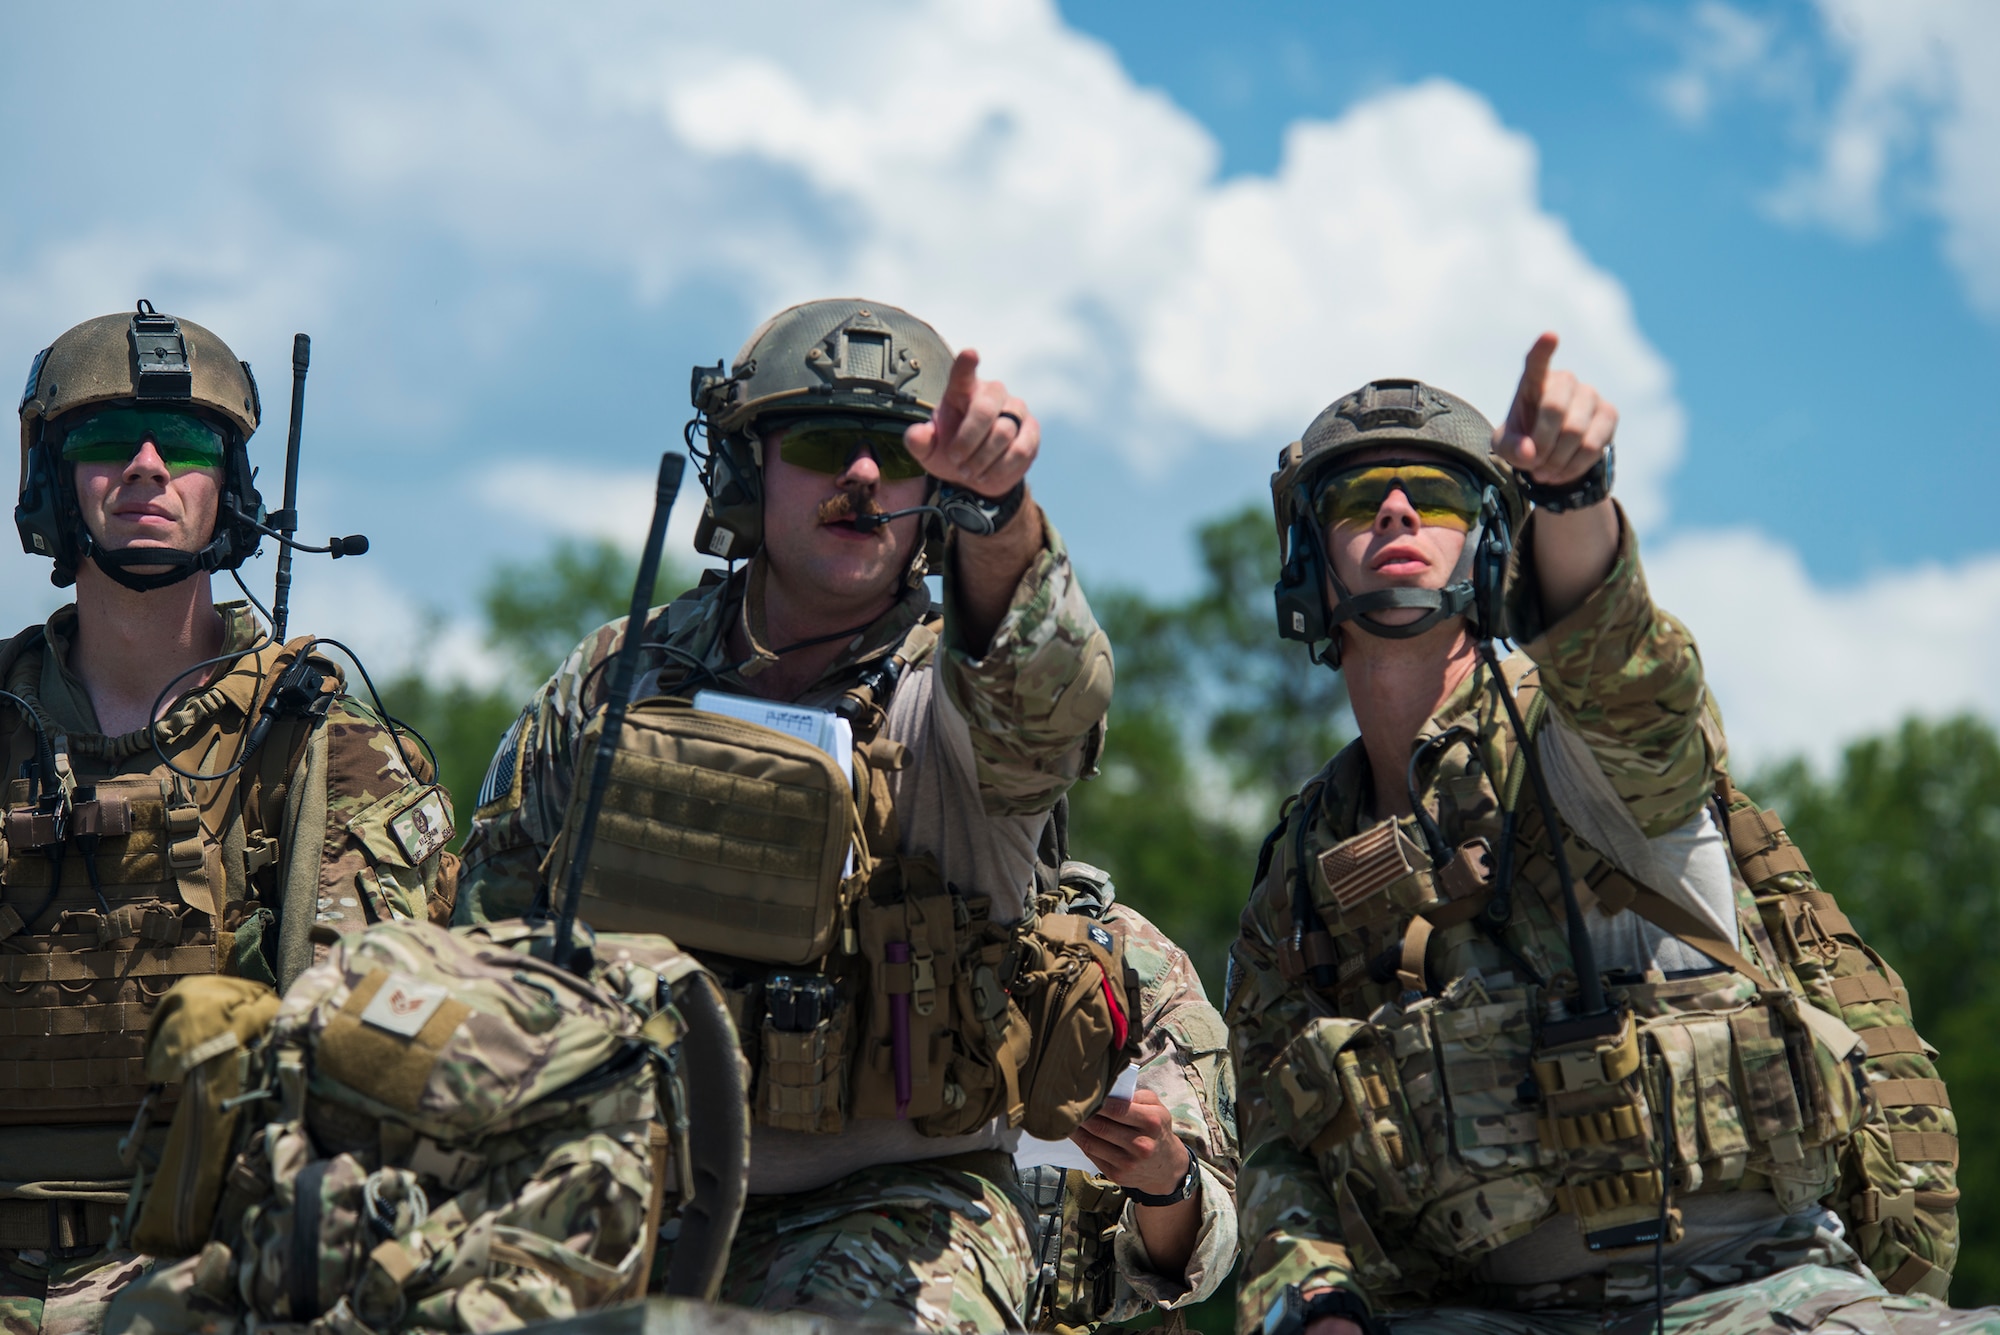 U.S. Air Force Capt. Kyle Spain, 7th Air Support Operations Squadron joint terminal attack controller instructor, left, Staff Sgt. Tyler Puterbaugh, middle, and Tech Sgt. Ron Tyson 7th ASOS tactical air control parties, right, identify a target during a sister squadron scenario June 18, 2015, on Grand Bay Bombing and Gunnery Range at Moody Air Force Base, Ga. The TACPs communicated with A-10C Thunderbolt II pilots to help direct airstrikes. (U.S. Air Force photo by Airman 1st Class Ceaira Tinsley/Released)